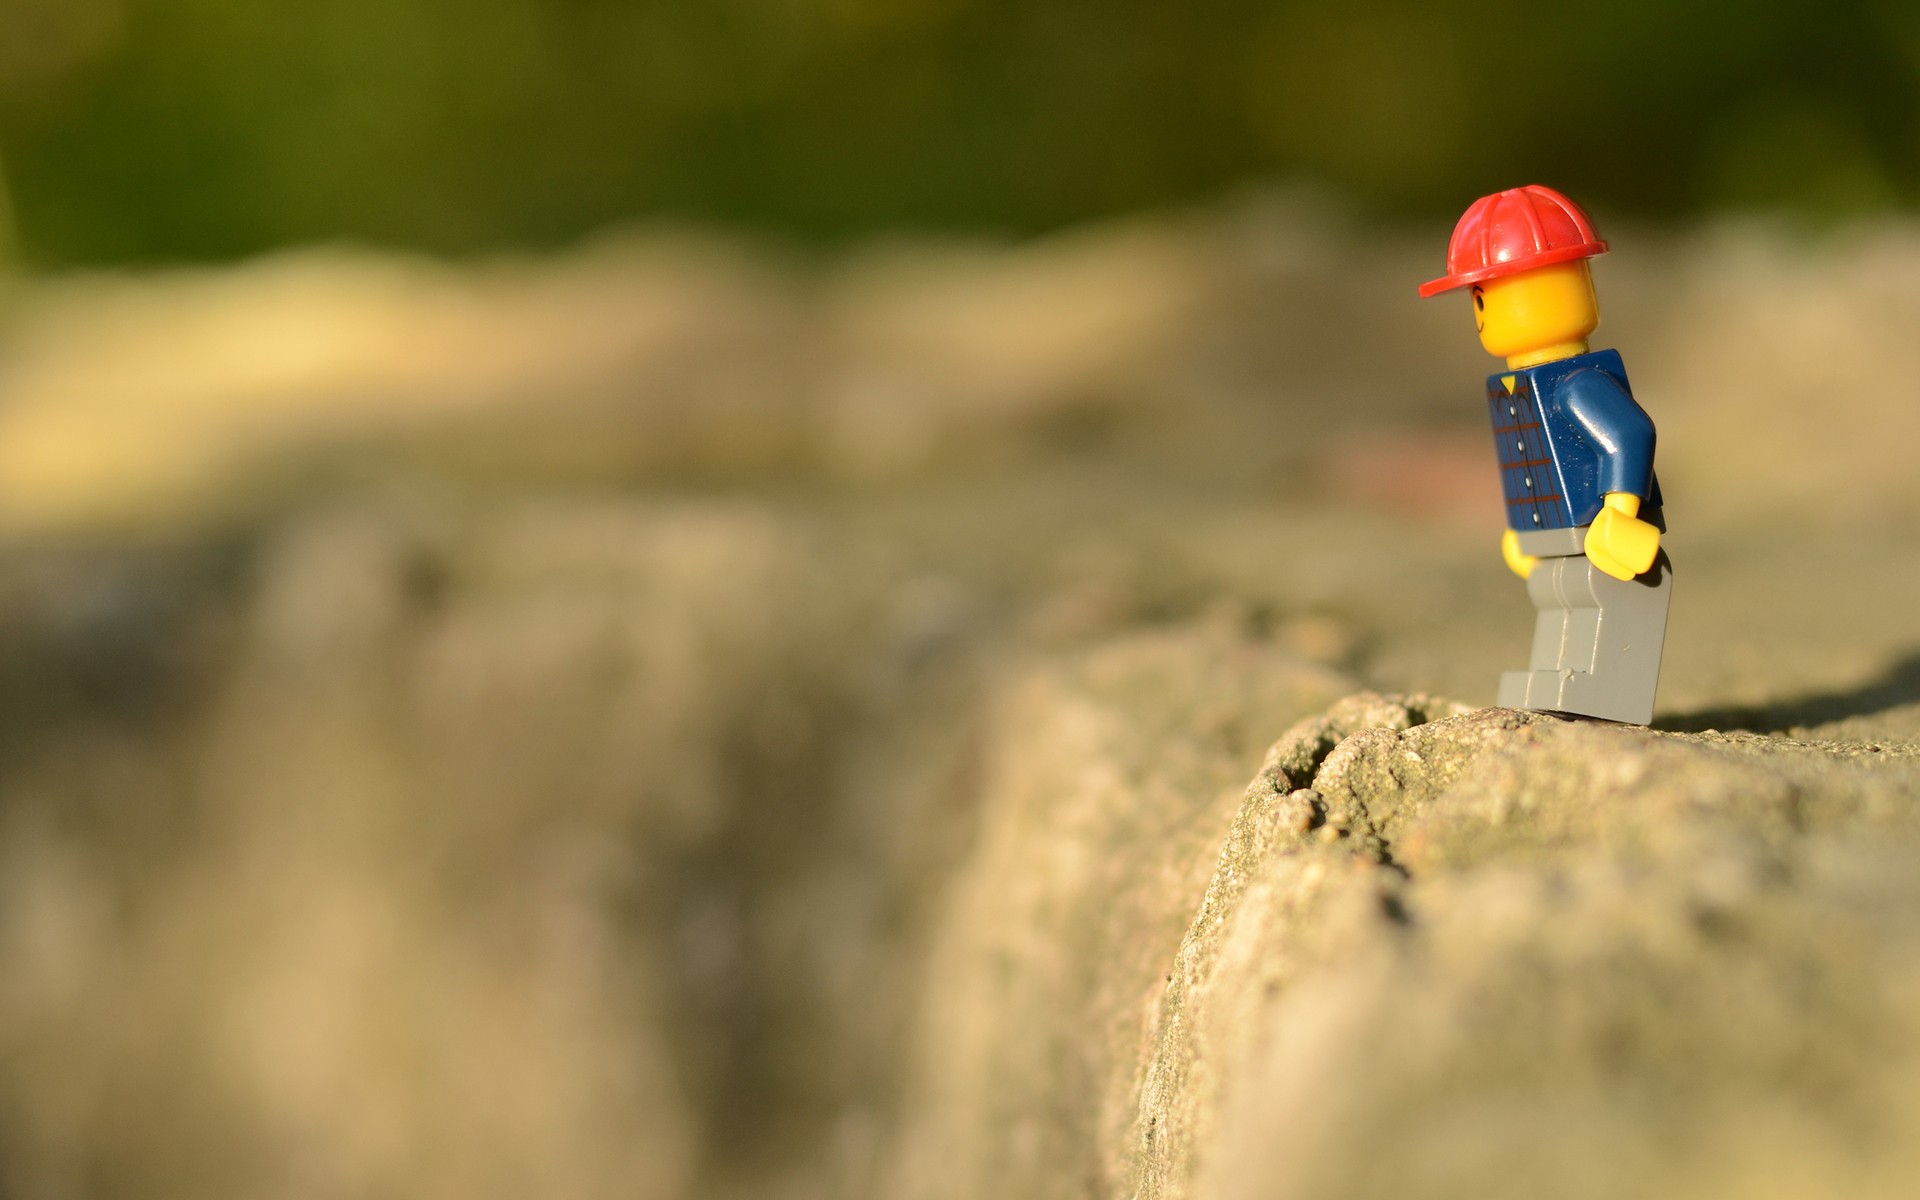 Lonely Lego HD Wallpaper Full Size